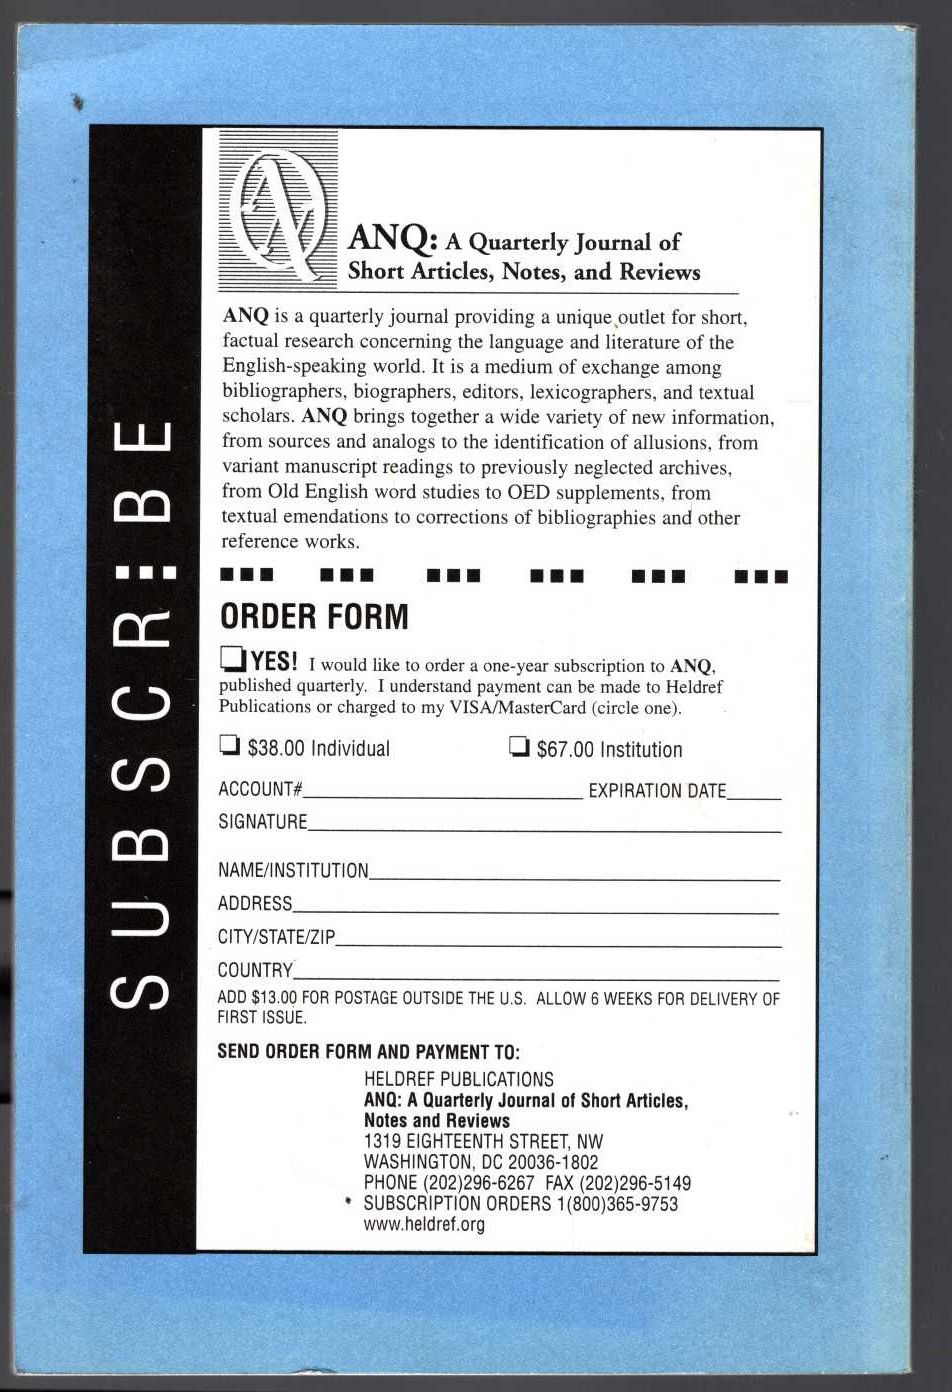 Various   ANQ: A QUARTERLY JOURNAL OF SHORT ARTICLES, NOTES, AND REVIEWS. Volume 11. Number 3. Summer 1998 magnified rear book cover image